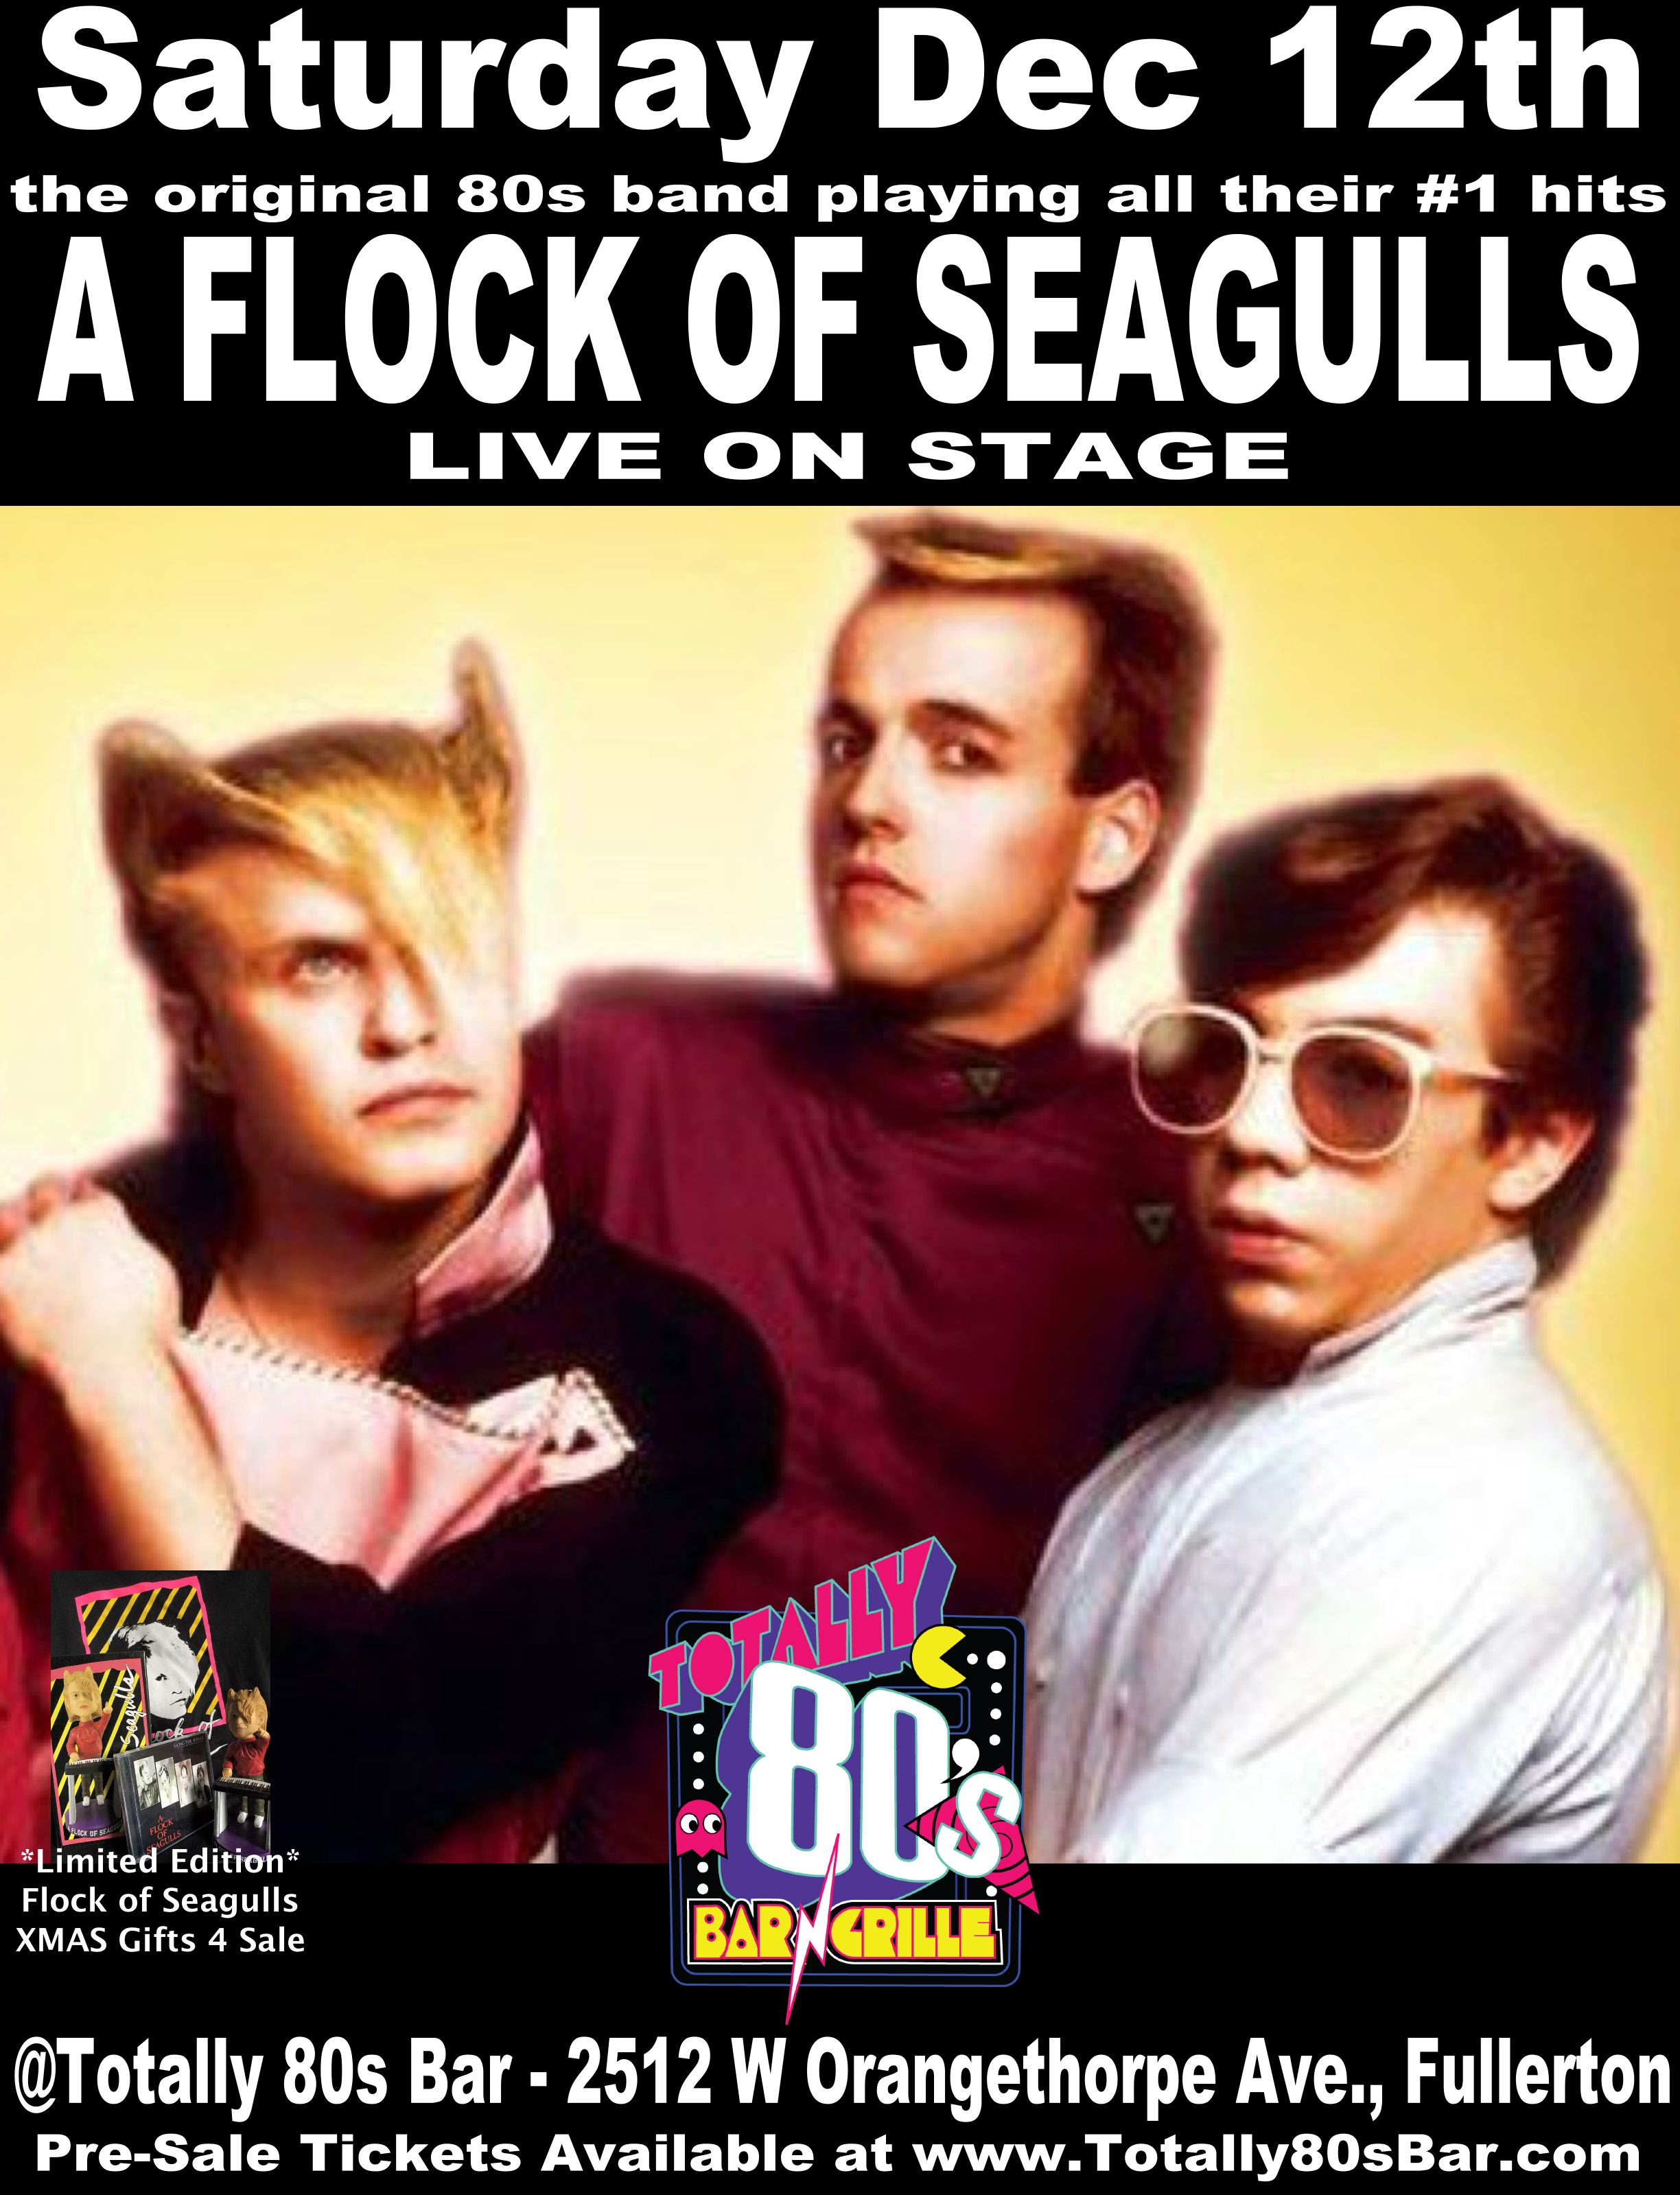 A Flock of Seagulls Live on Stage Tickets 12/12/15